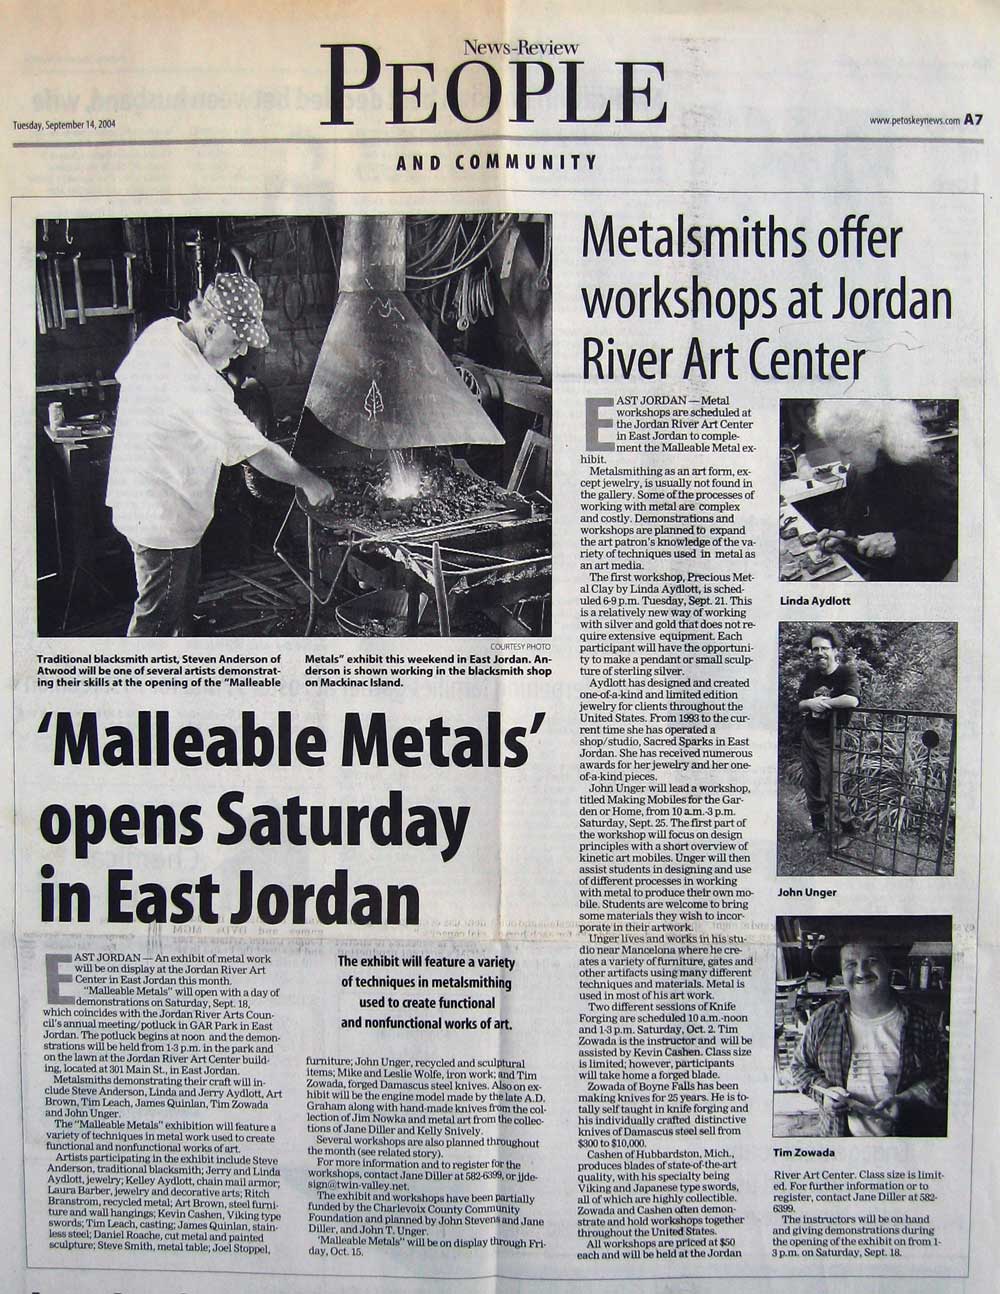 “Malleable Metals opens Saturday in East Jordan,” Petoskey News Review, Petoskey, MI, September 14, 2004, Section one, 7.